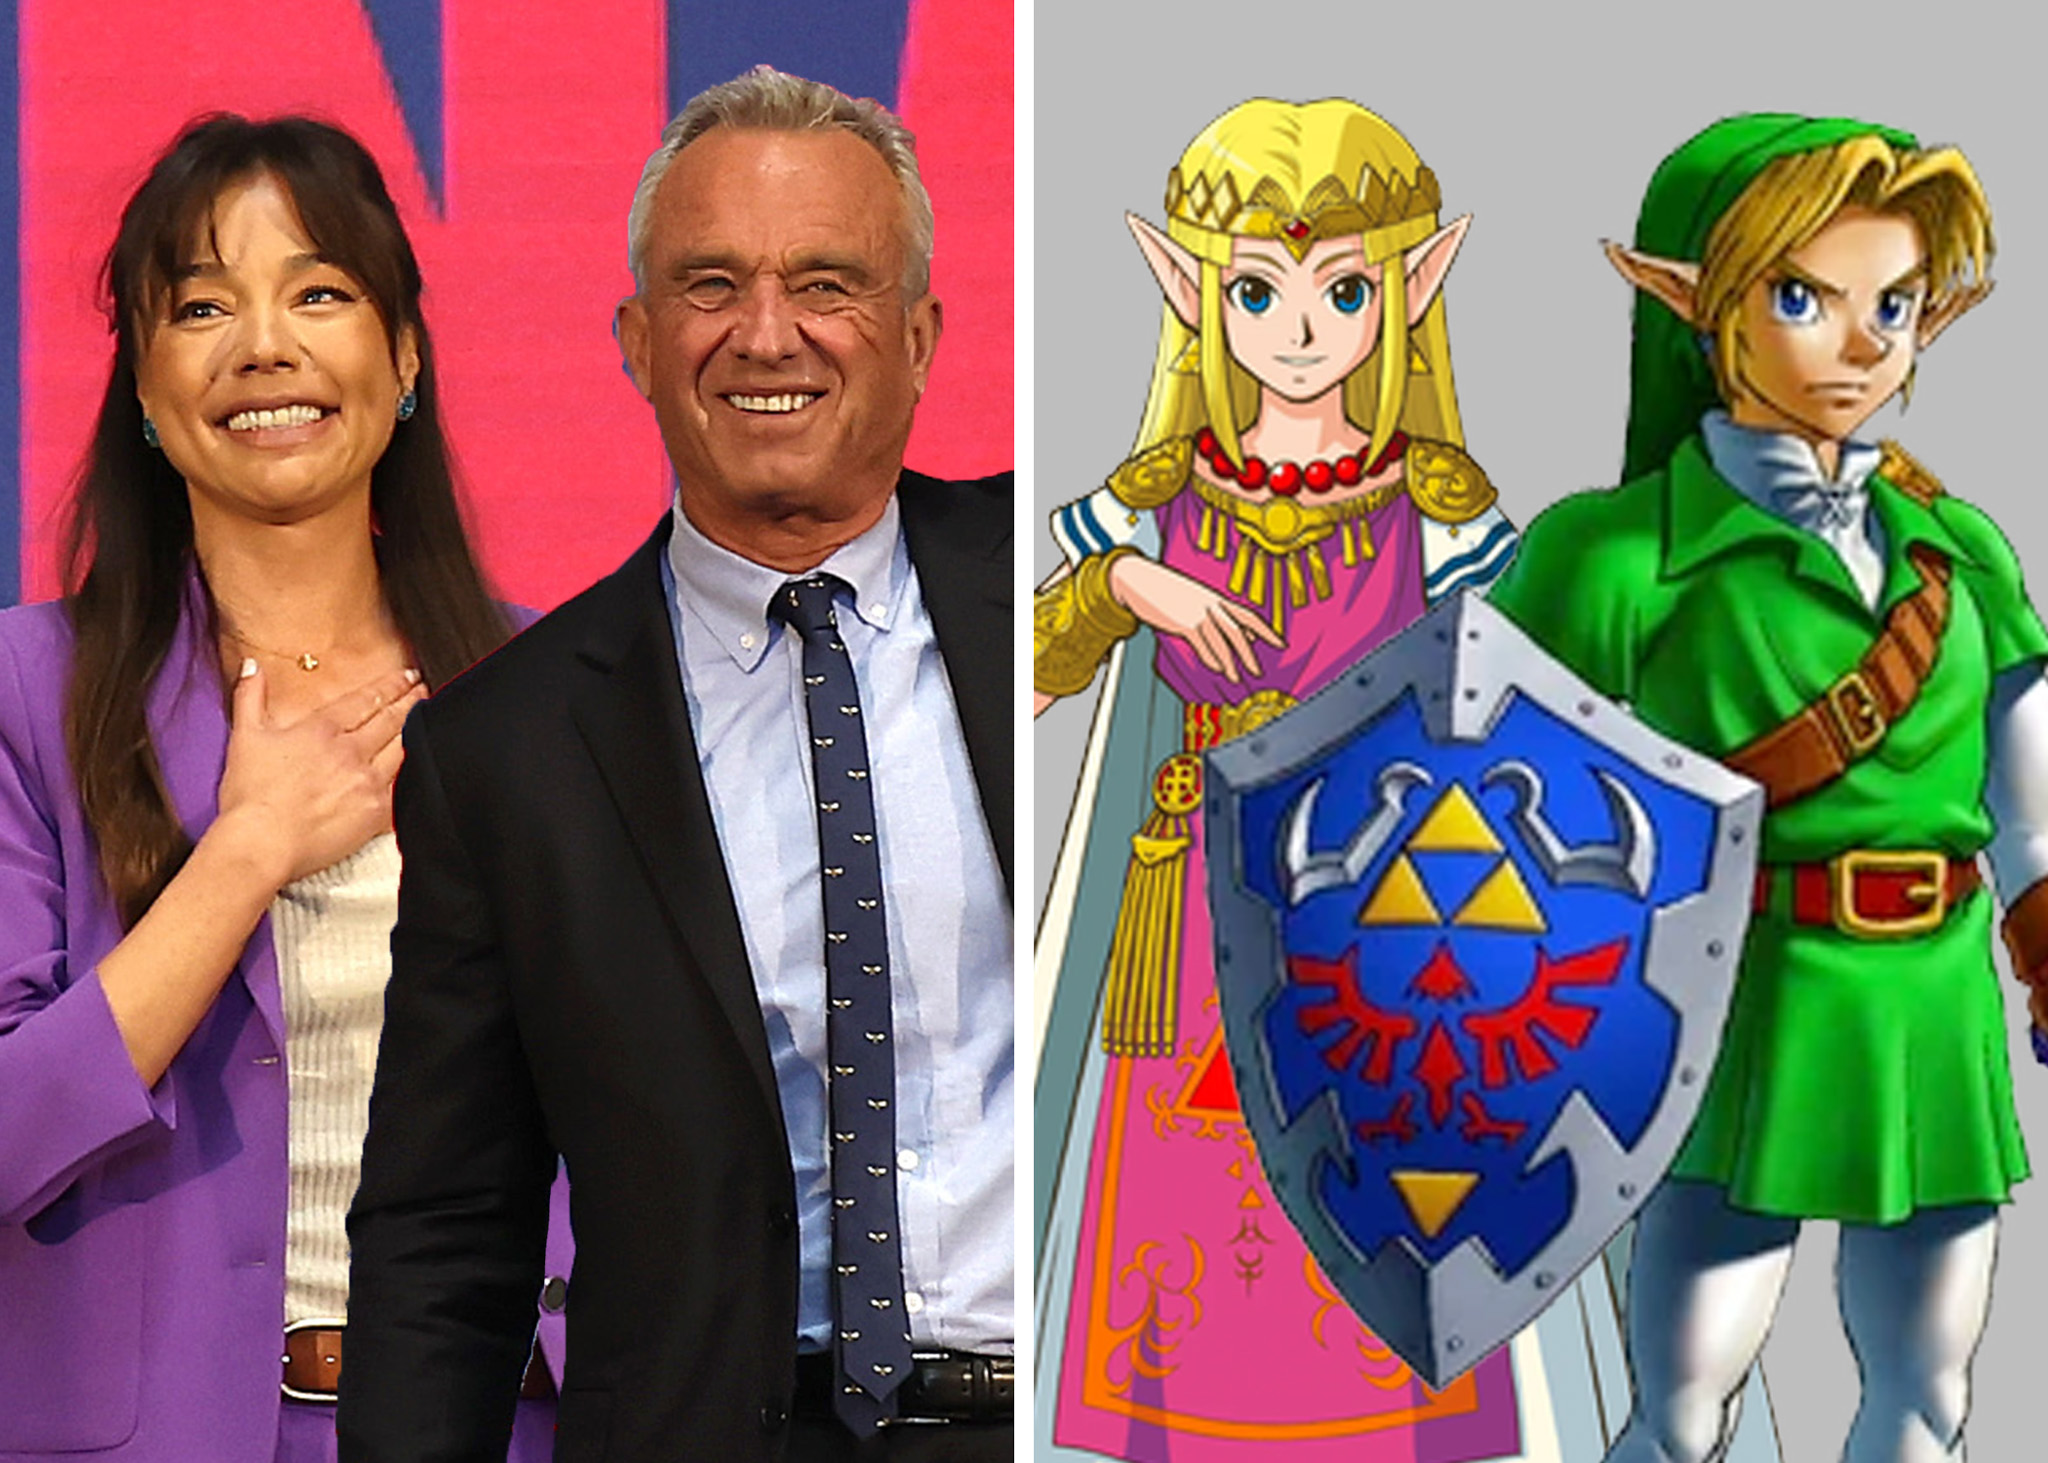 The image is split in two. On the left are a smiling woman in a purple outfit and a smiling man in a suit. On the right are animated characters Zelda and Link.